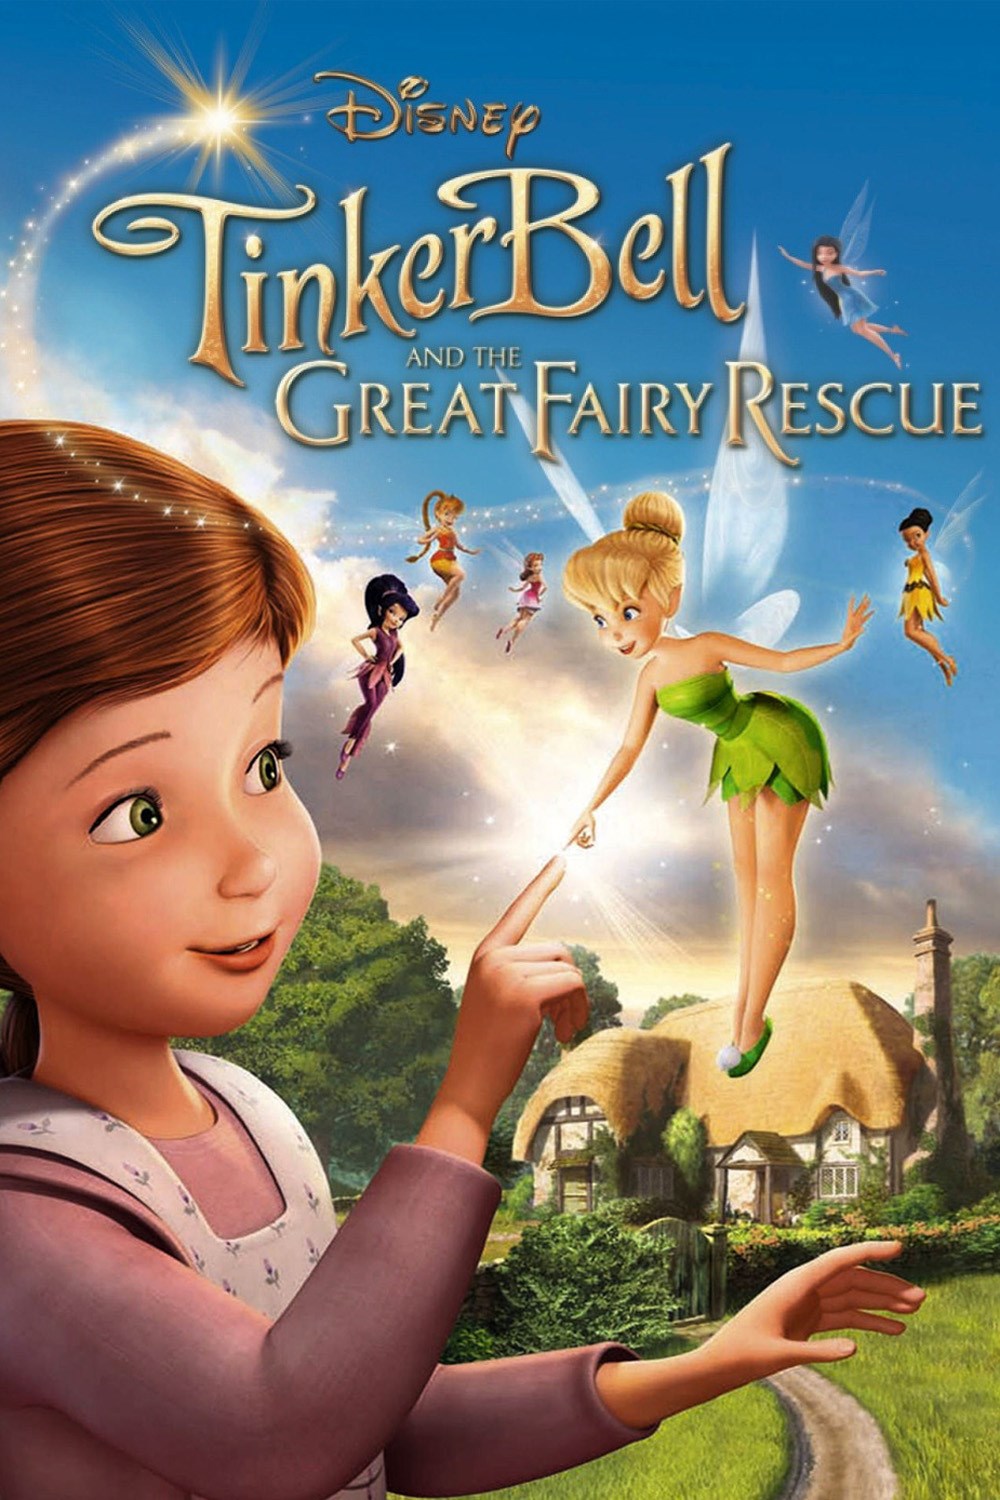 download film tinkerbell secret of the wings sub indo